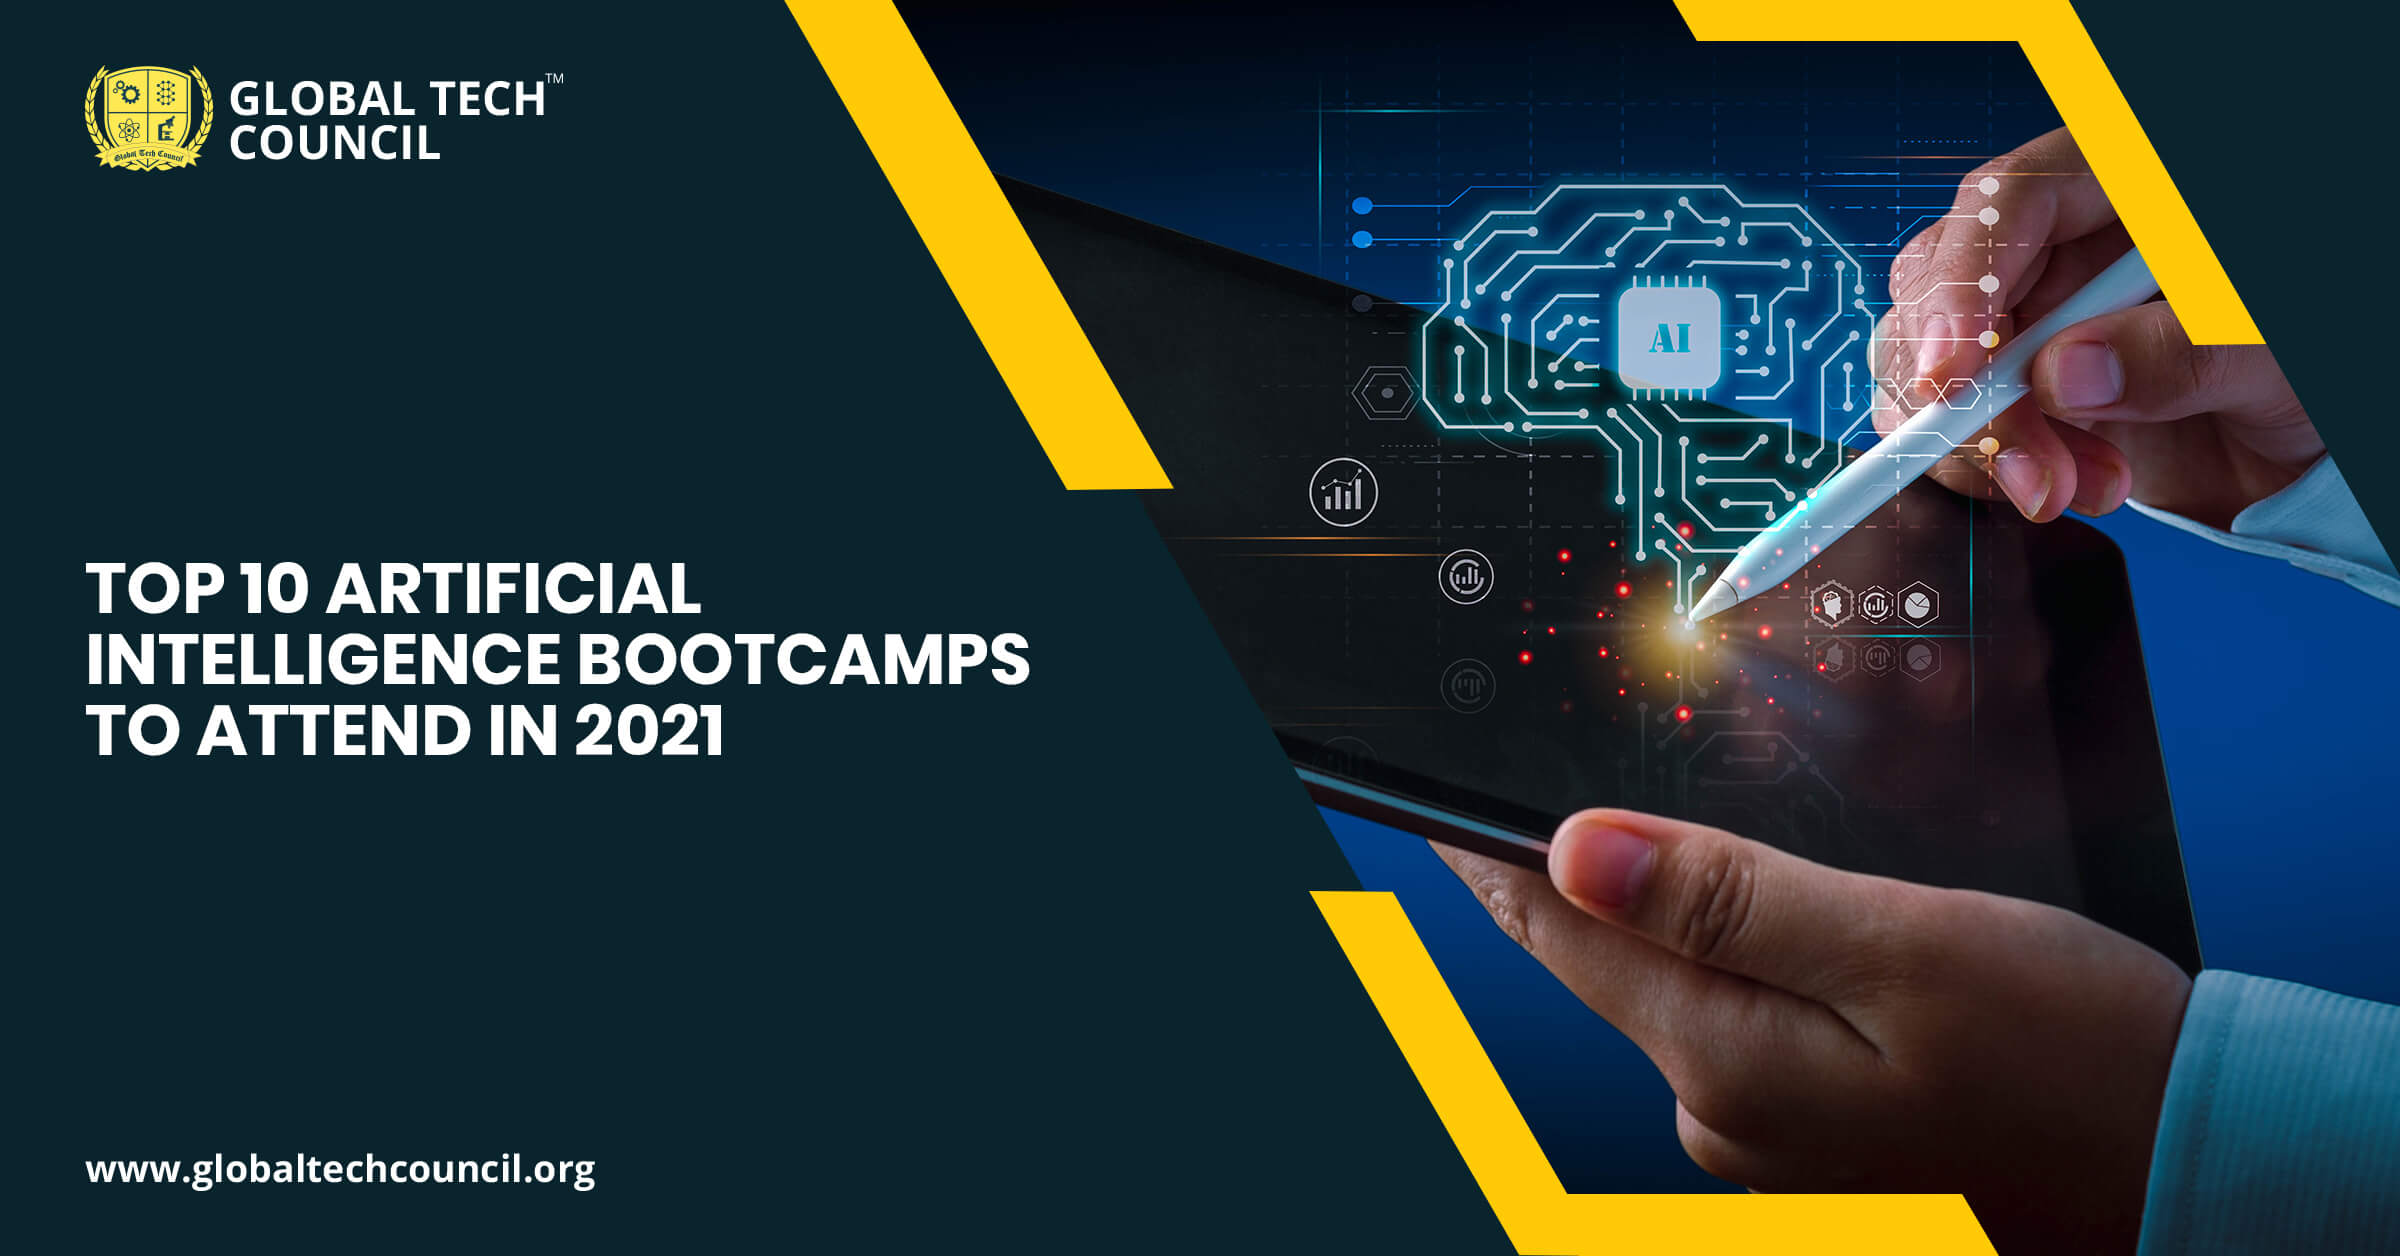 Top 10 Artificial Intelligence Bootcamps to Attend in 2021